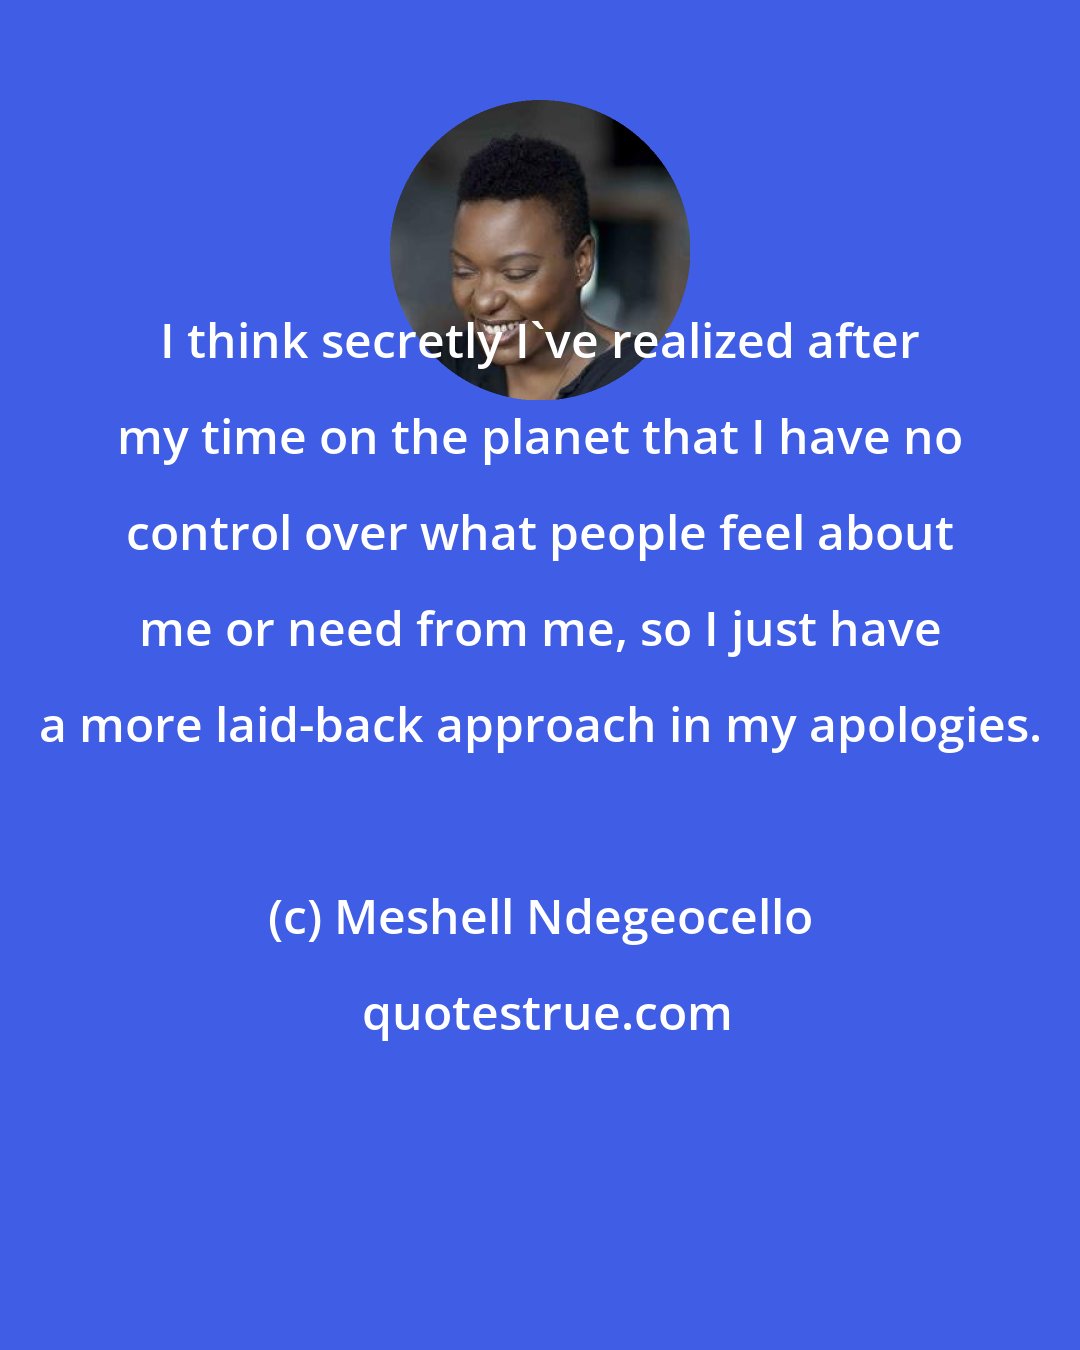 Meshell Ndegeocello: I think secretly I've realized after my time on the planet that I have no control over what people feel about me or need from me, so I just have a more laid-back approach in my apologies.